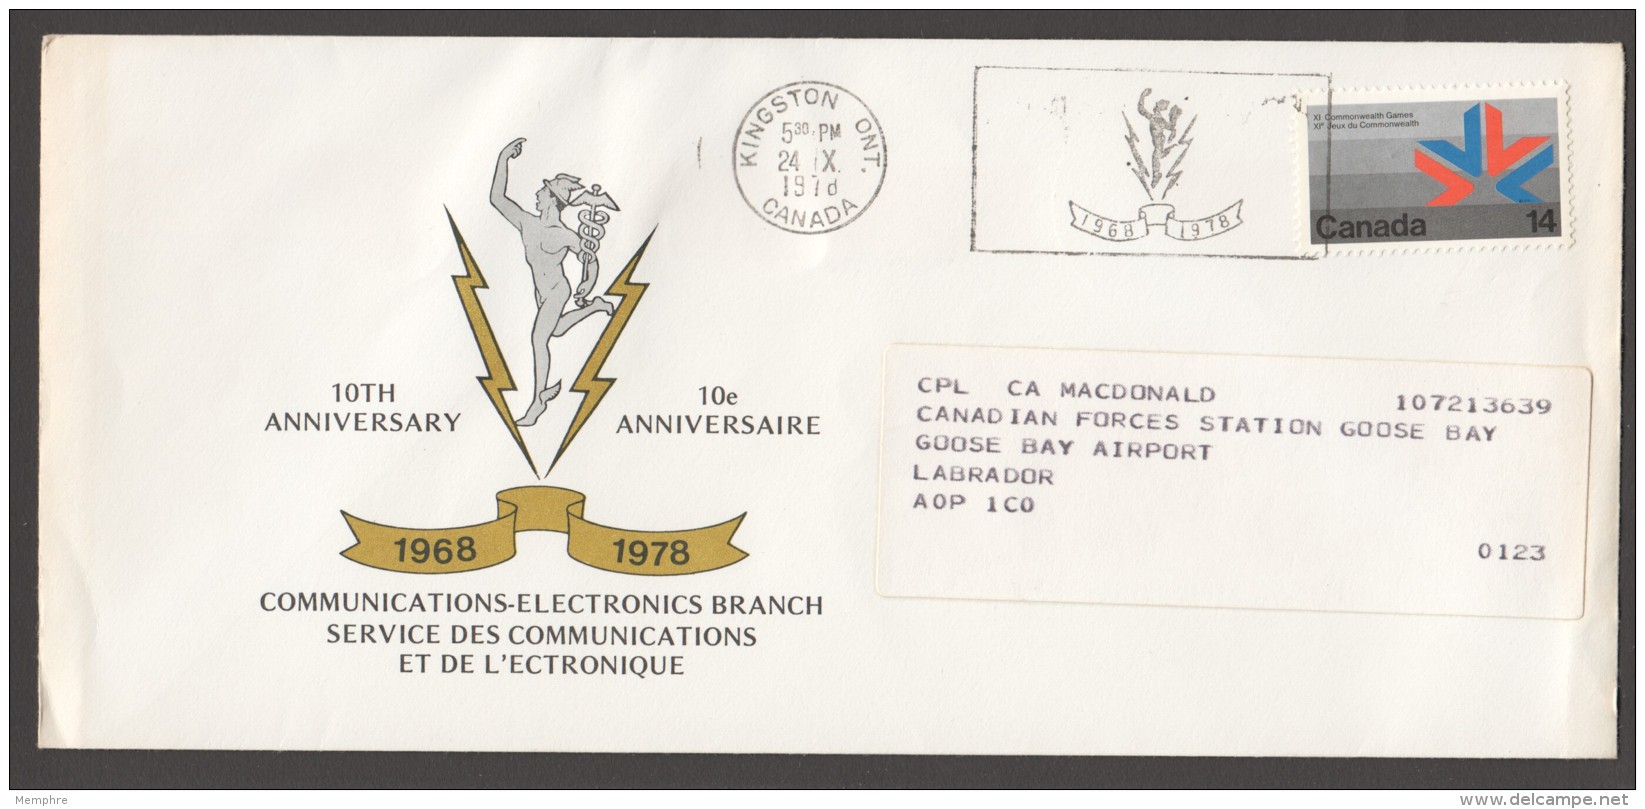 MILITARY -  Canadian Forces Communication-Electronic Branch - Special Cancel - Commemorativi